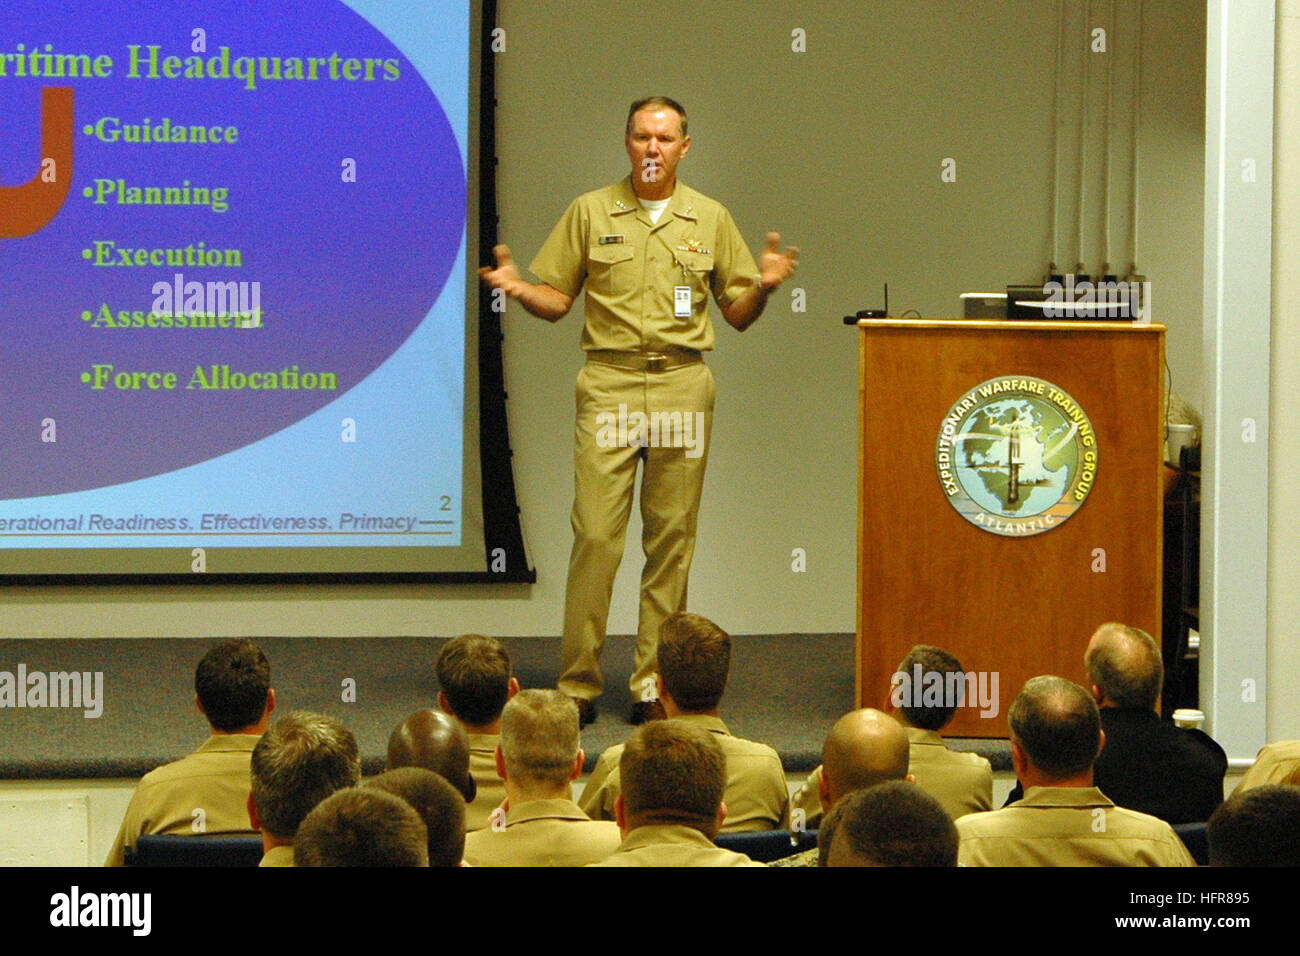 060627-N-0924R-041 Norfolk, Va. (June 27, 2006) - Commander, 2nd Fleet, Vice Adm. Mark P. Fitzgerald, briefs Navy and Marine Corp officers and enlisted personnel at Bataan Expeditionary Strike group (ESG) and 26th Marine Expeditionary Unit (MEU) Planning Workshop held at Naval Amphibious Base Little Creek, Va. The workshop prepared the Bataan ESG and 26th MEU for their upcoming deployment. U.S. Navy photo by Lithographer Seaman Cory Rose (RELEASED) US Navy 060627-N-0924R-041 Commander, 2nd Fleet, Vice Adm. Mark P. Fitzgerald, briefs Navy and Marine Corp officers and enlisted personnel at Bataa Stock Photo